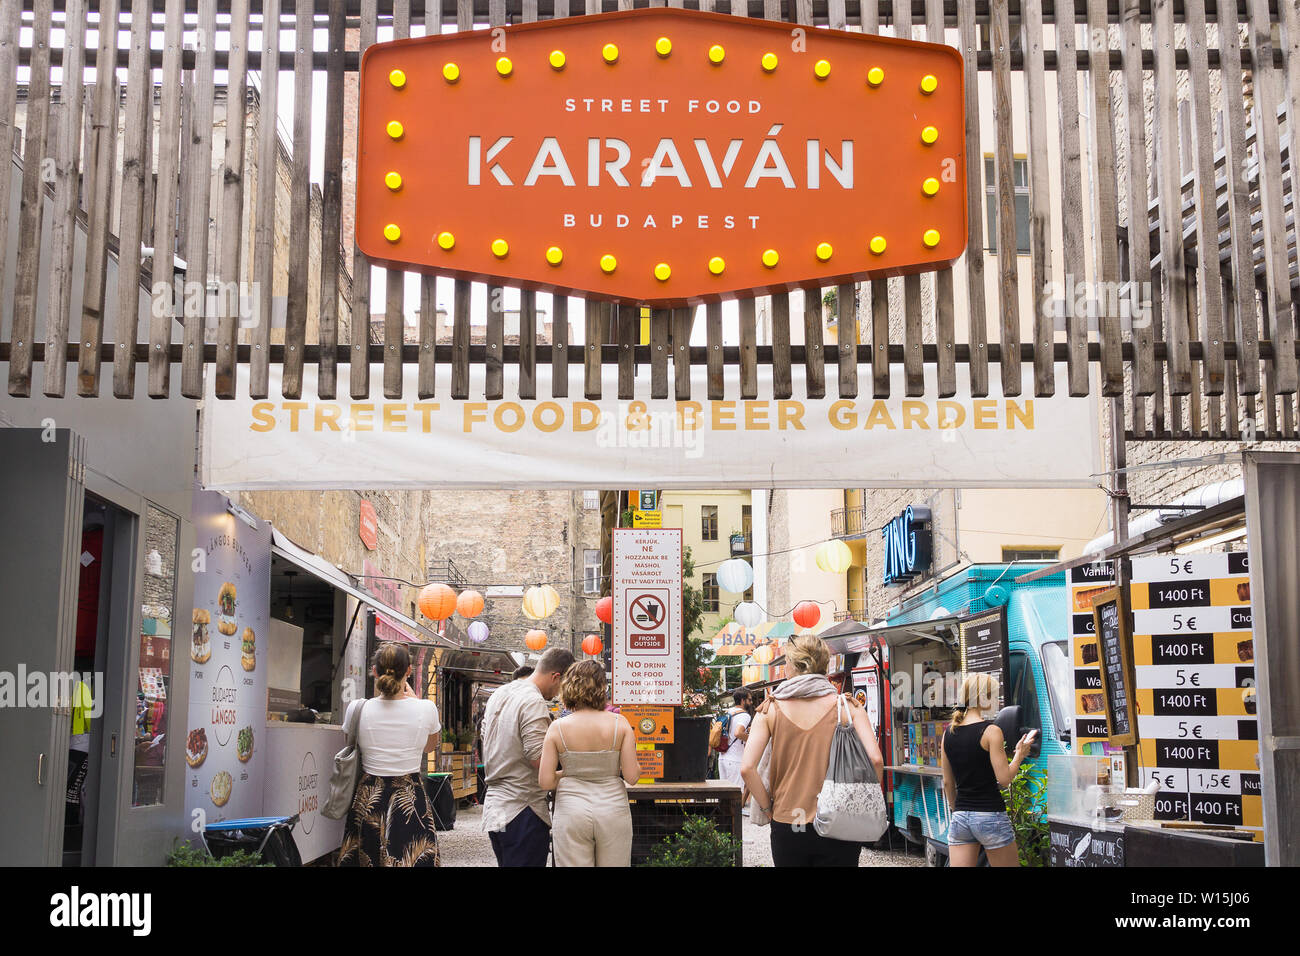 Entrance to the Karavan street food court in the Jewish quarter (7th district) in Budapest, Hungary. Stock Photo